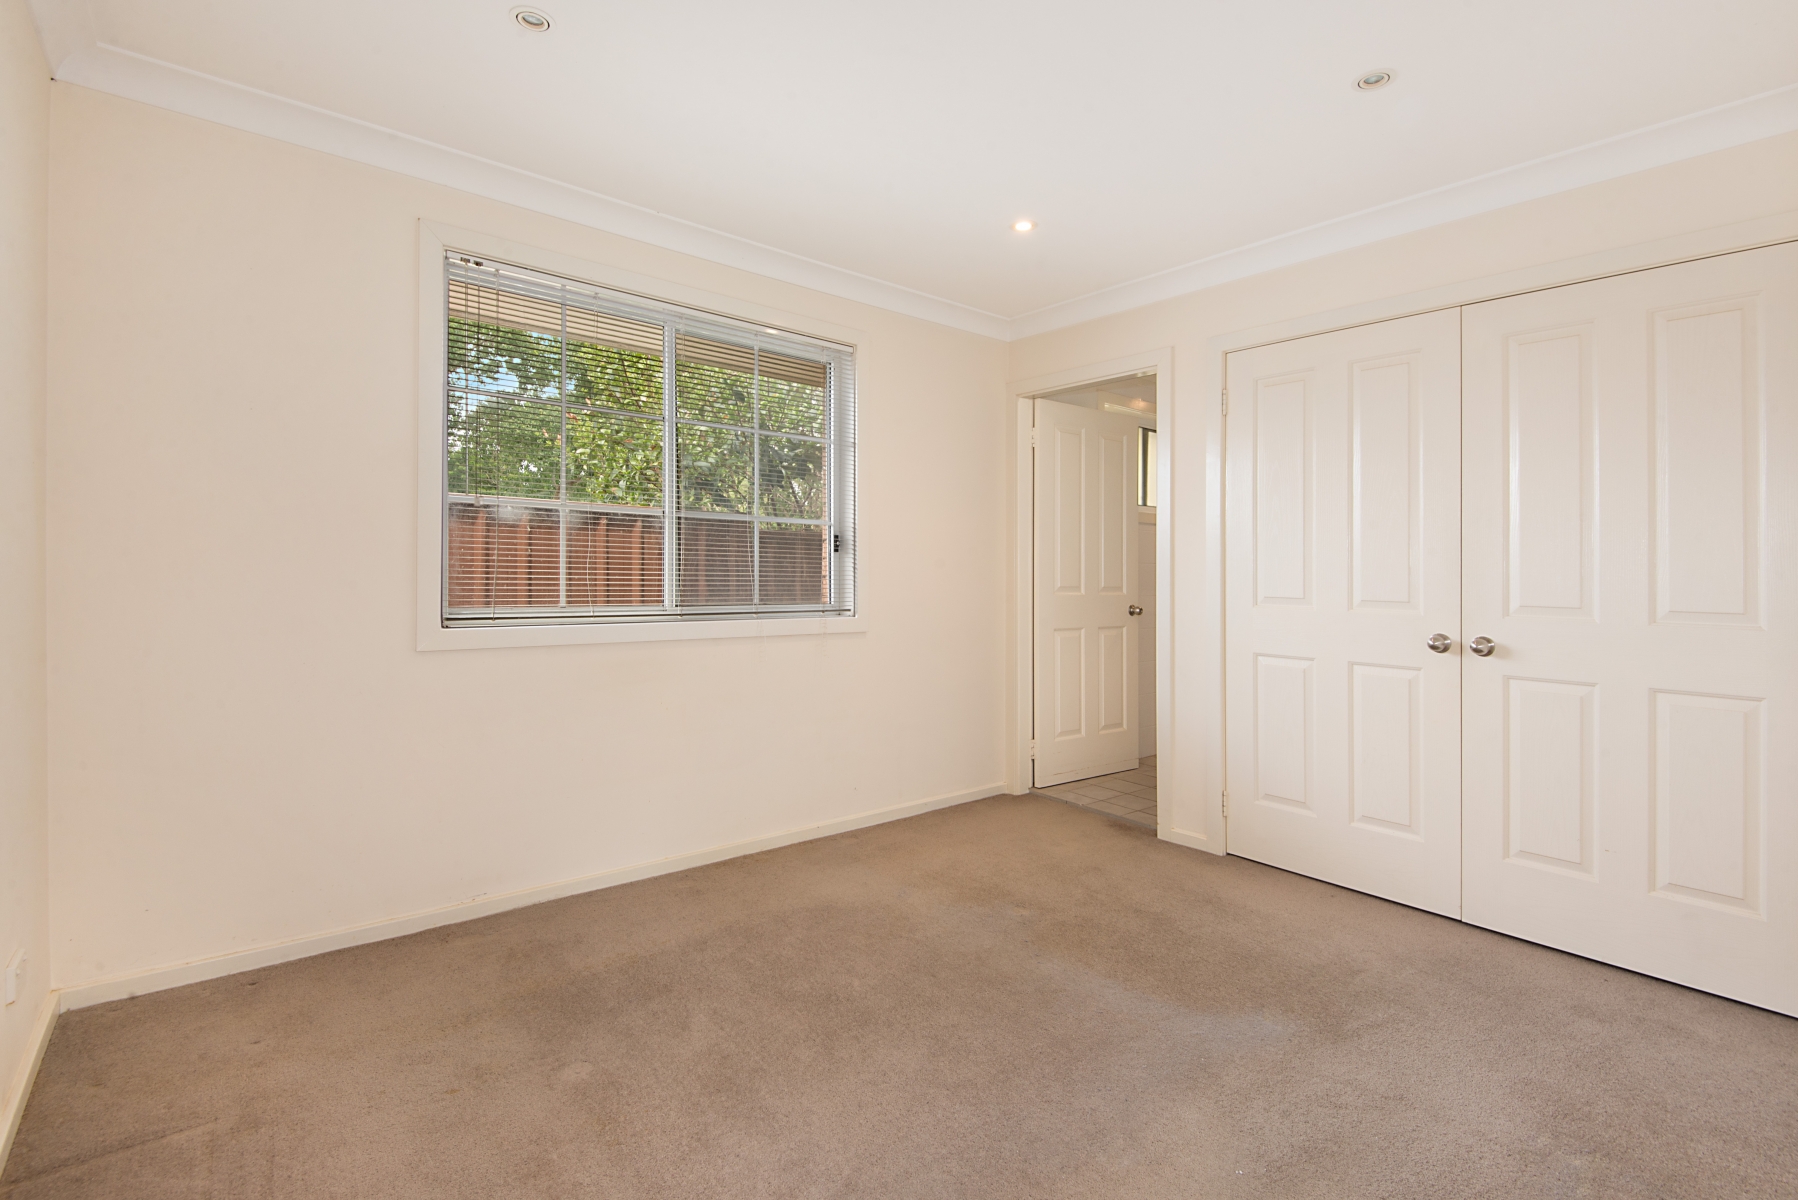 1 Rooms, House, For Rent, Joseph Banks Drive, 1 Bathrooms, Listing ID 1663, Kings Langley, NSW, Australia, 2147,